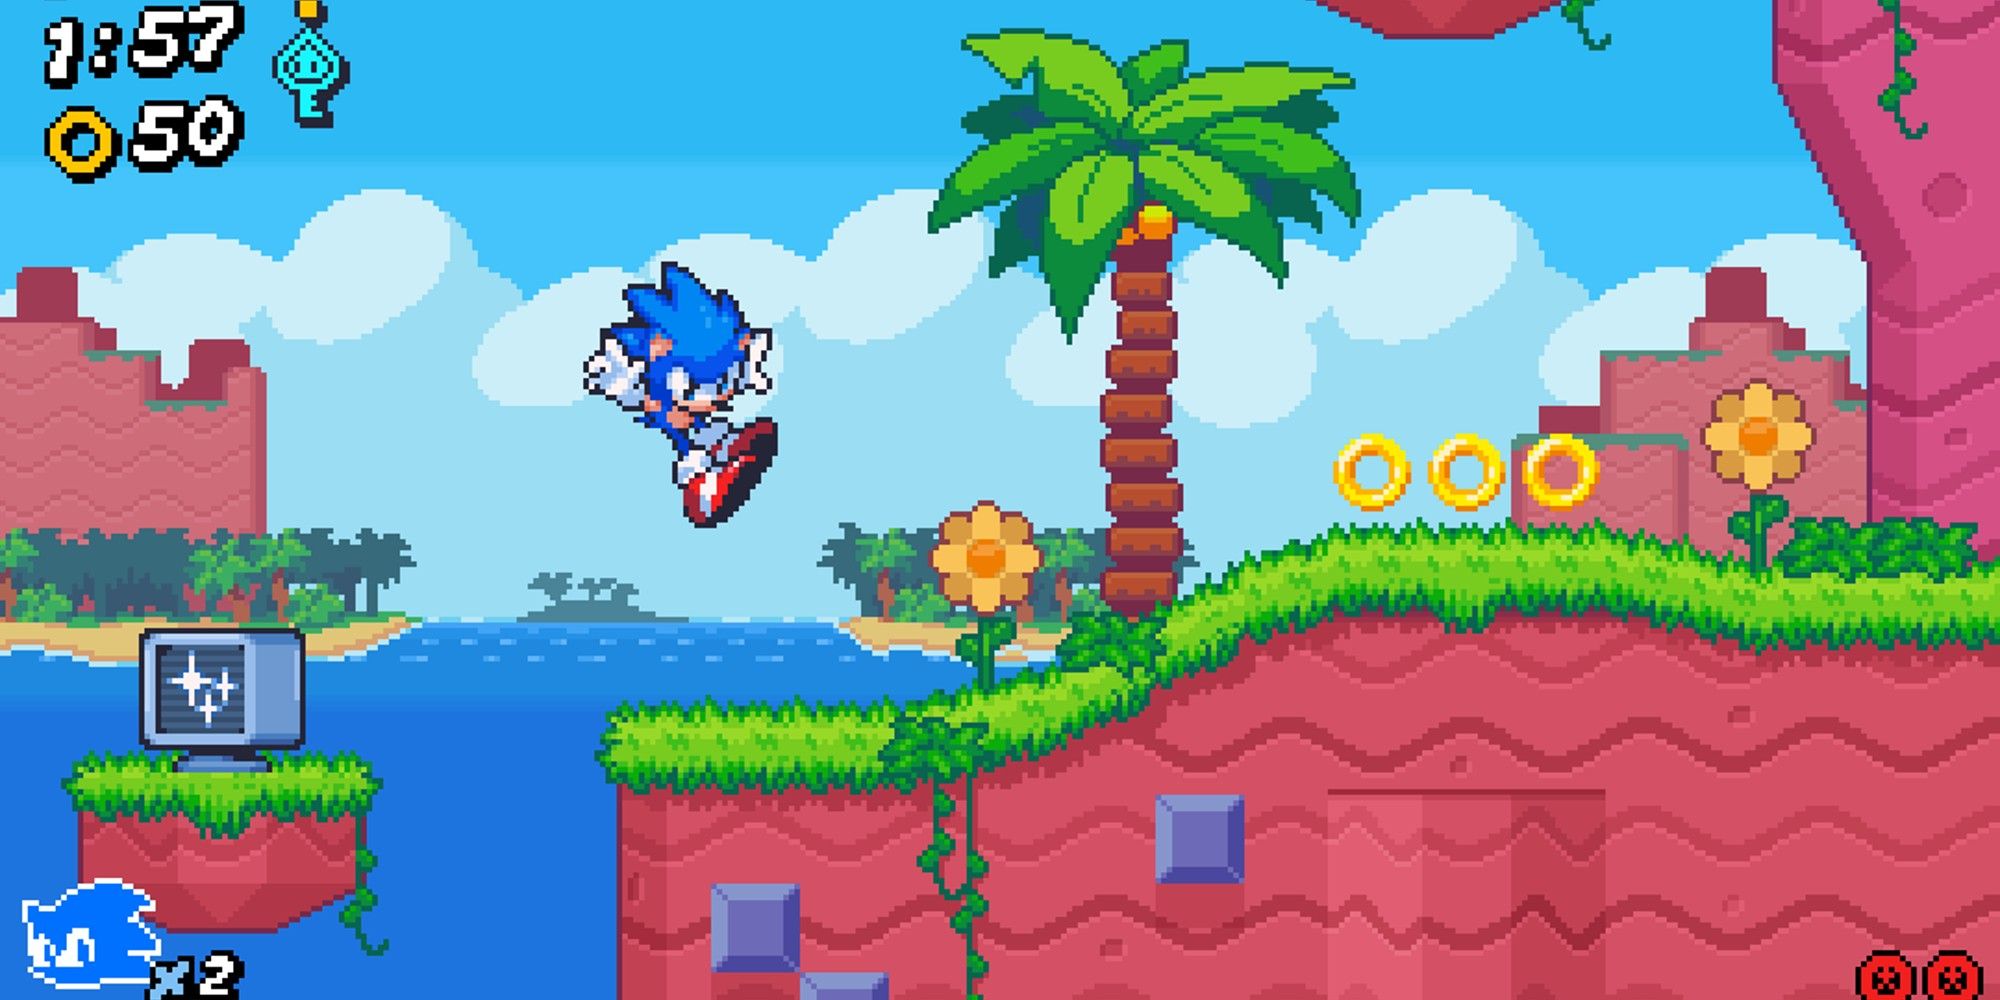 Pixel Artist Imagines A Stylish Take On A 2d Sonic Game